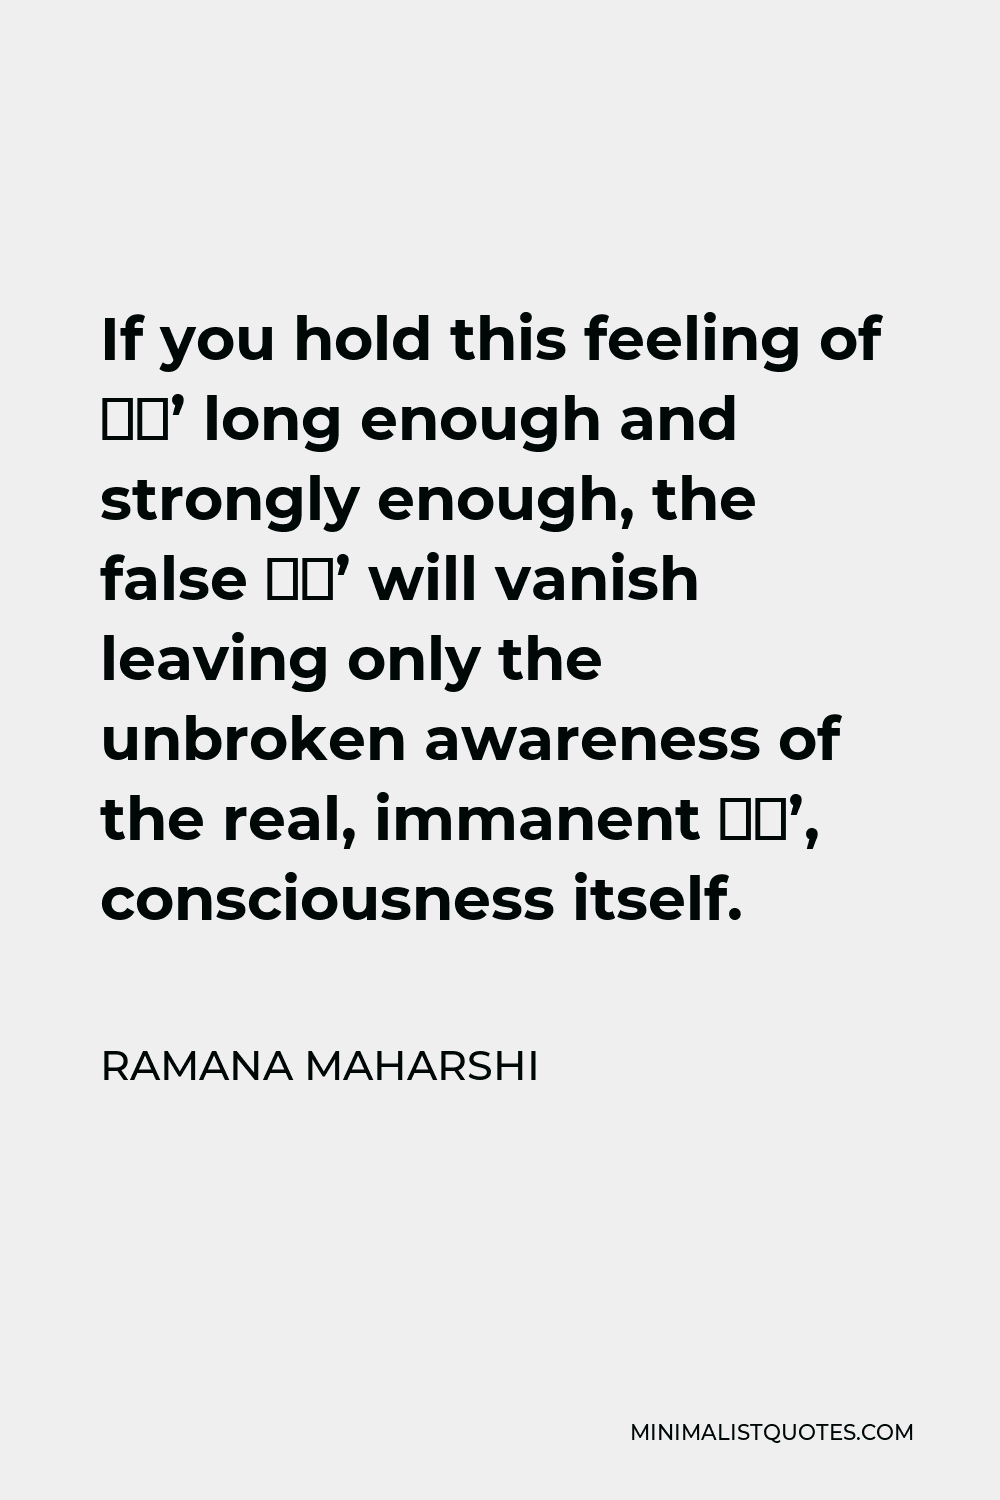 Ramana Maharshi Quote - If you hold this feeling of ‘I’ long enough and strongly enough, the false ‘I’ will vanish leaving only the unbroken awareness of the real, immanent ‘I’, consciousness itself.